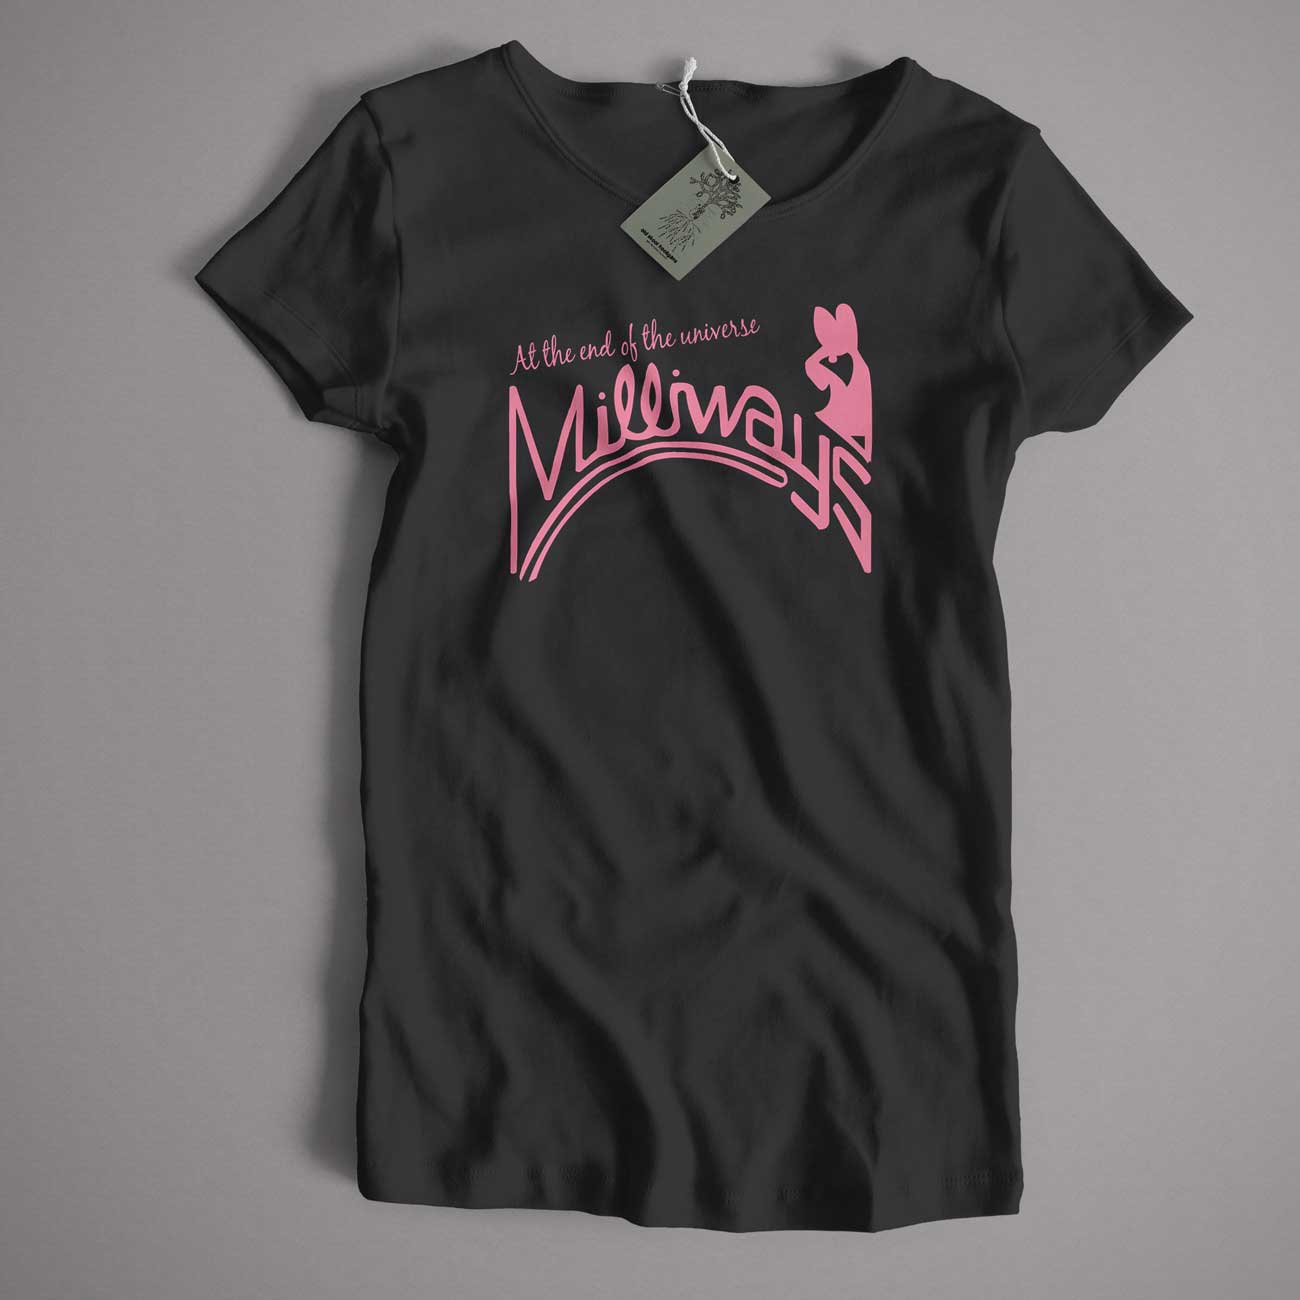 Milliways Restaurant At The End Of The Universe T Shirt  Hitchikers Guide To The Galaxy